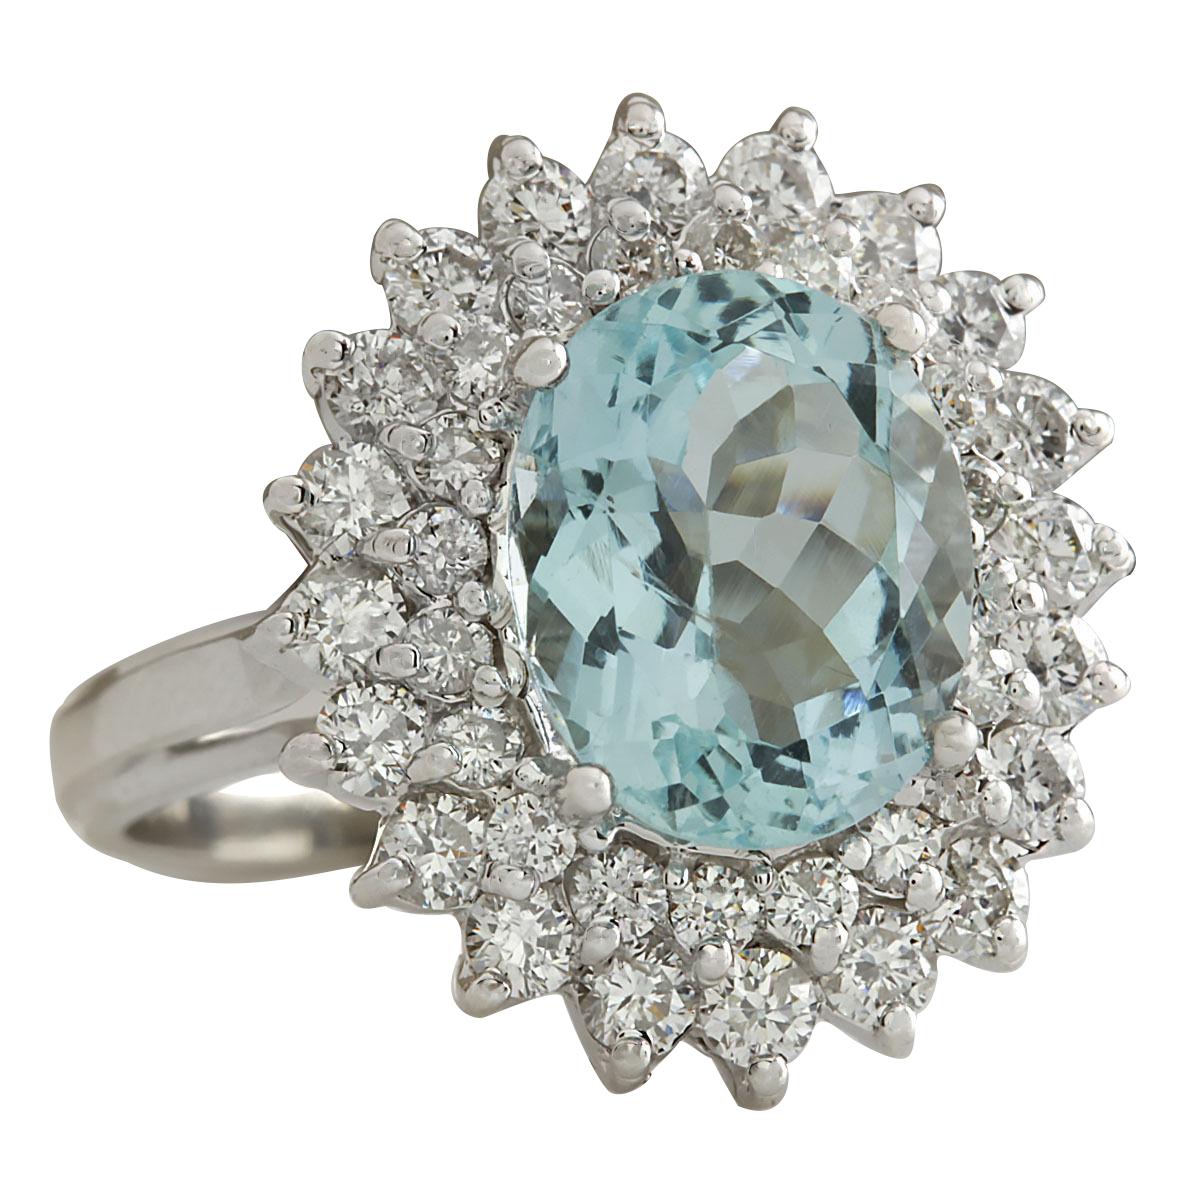 Stamped: 14K White Gold
Total Ring Weight: 6.8 Grams
Aquamarine Weight is 5.41 Carat (Measures: 11.00x9.00 mm)
Diamond Weight is 1.62 Carat
Color: F-G, Clarity: VS2-SI1
Face Measures: 19.40x17.25 mm
Sku: [702519W]